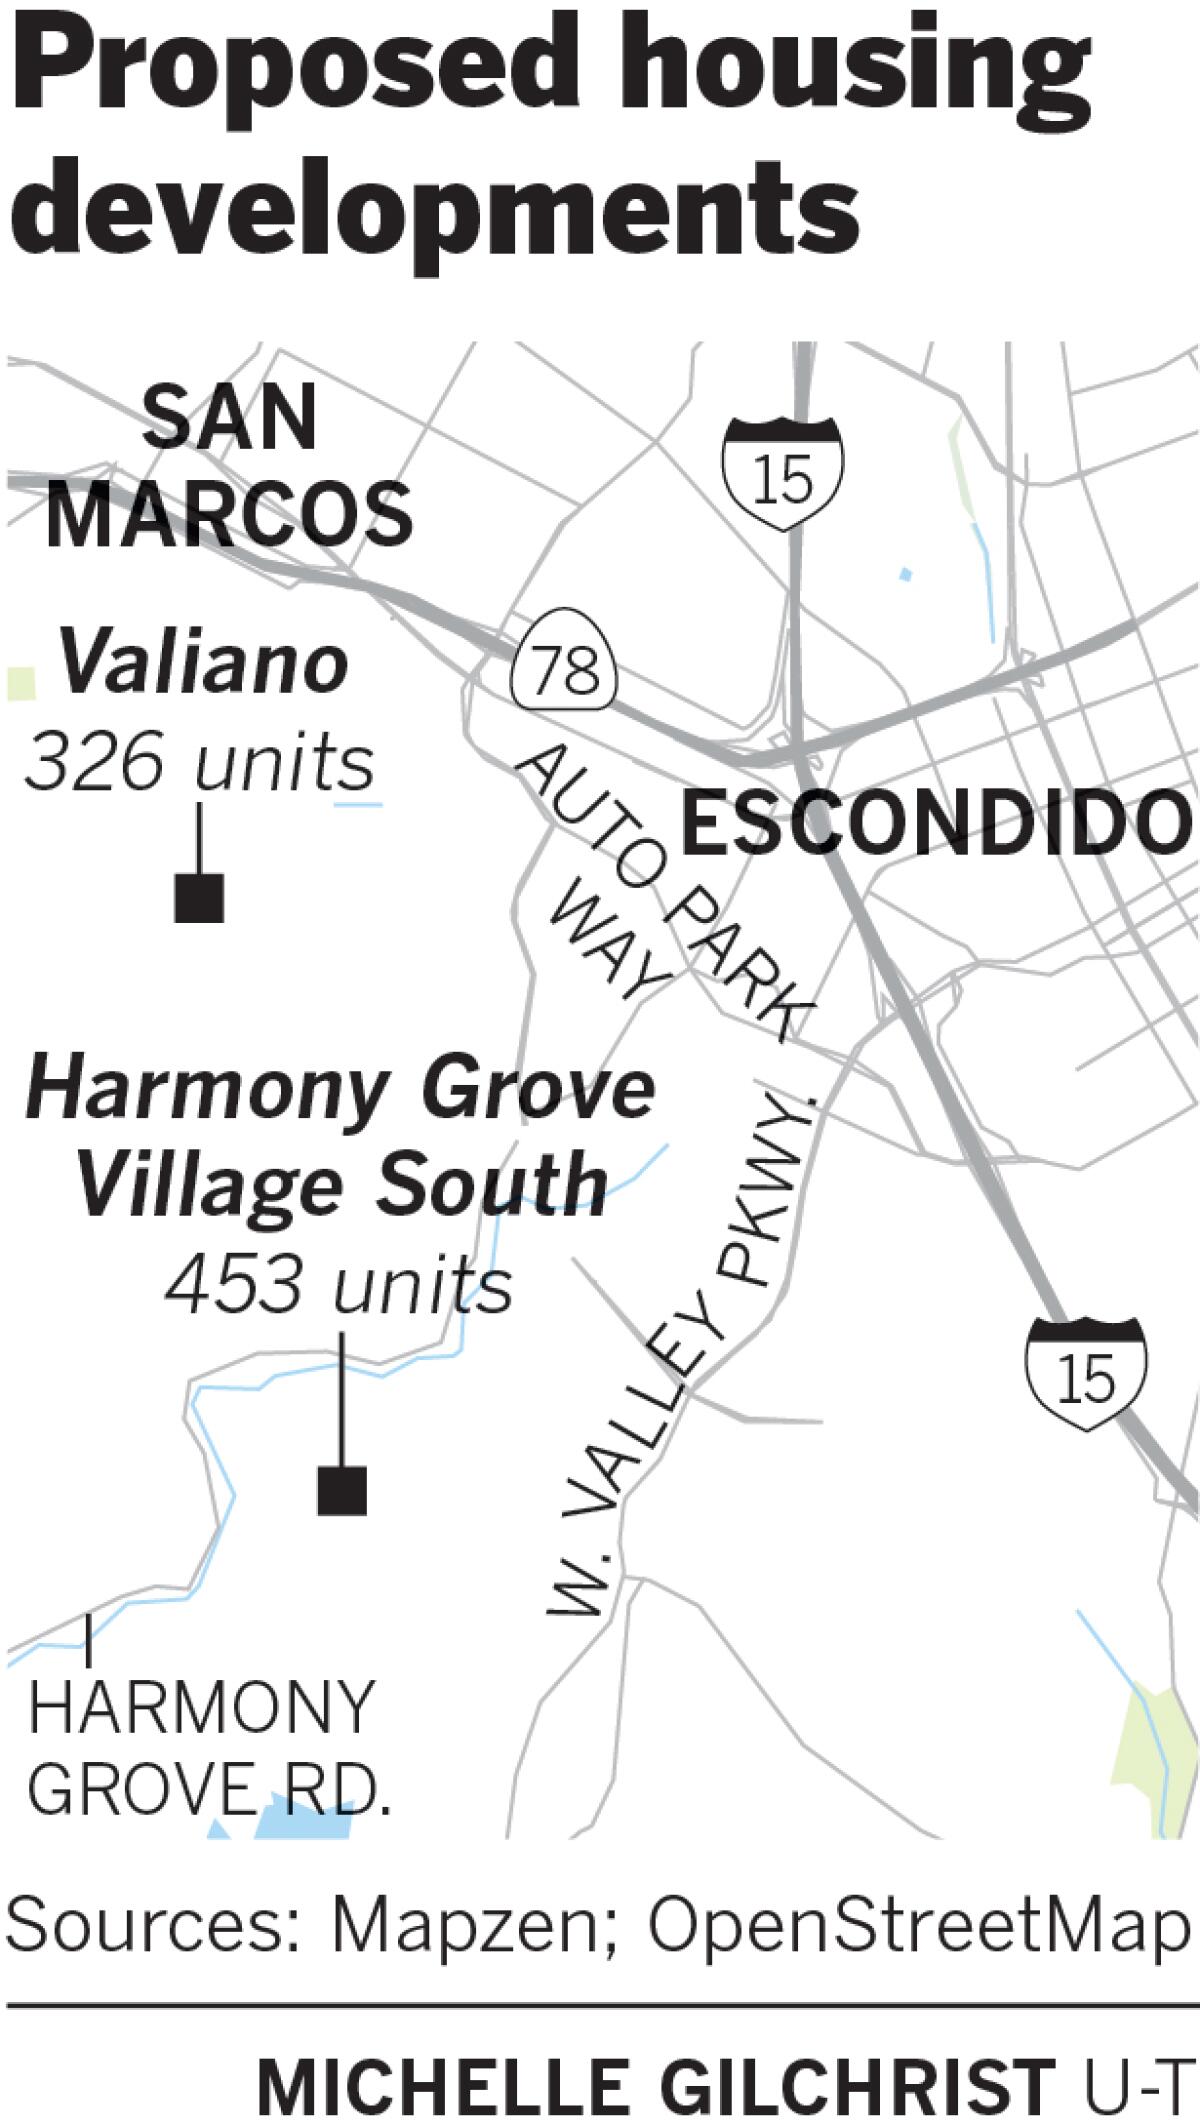 An appellate court rejected Harmony Grove Village South and Valiano based on greenhouse gas emissions.